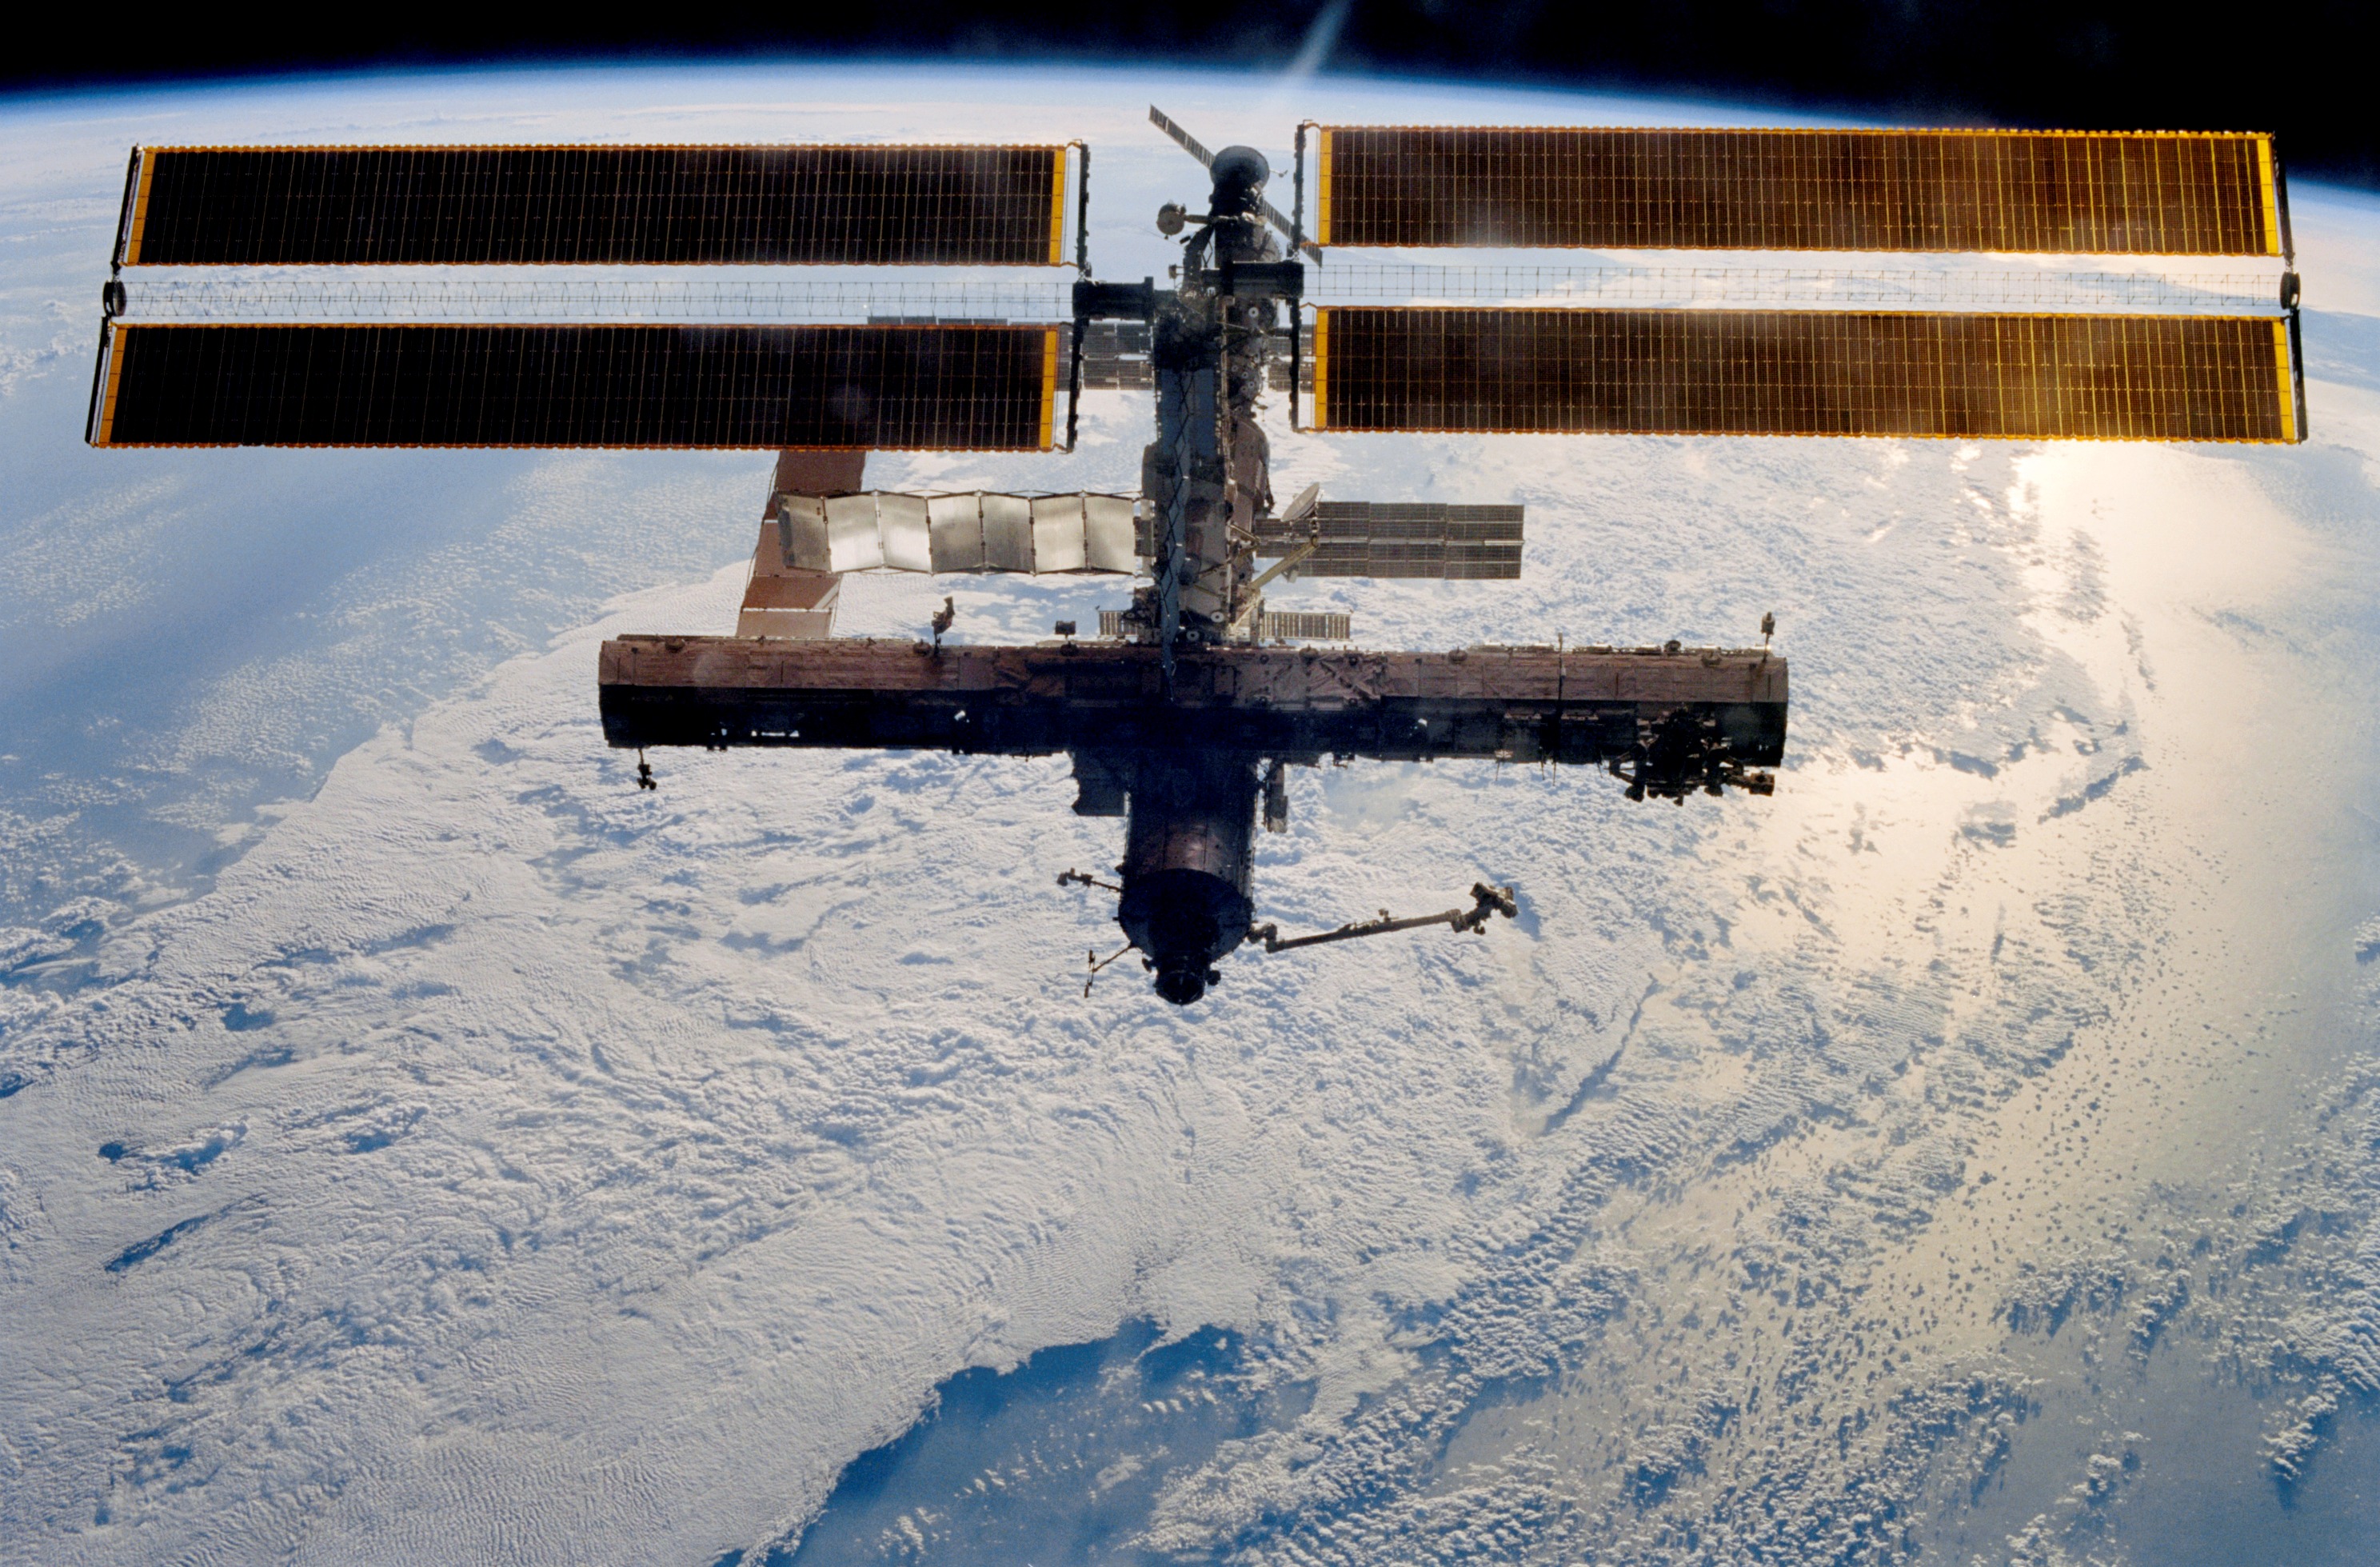 The space station as seen by the departing STS-113 crew, with the newly installed P1 truss visible at right